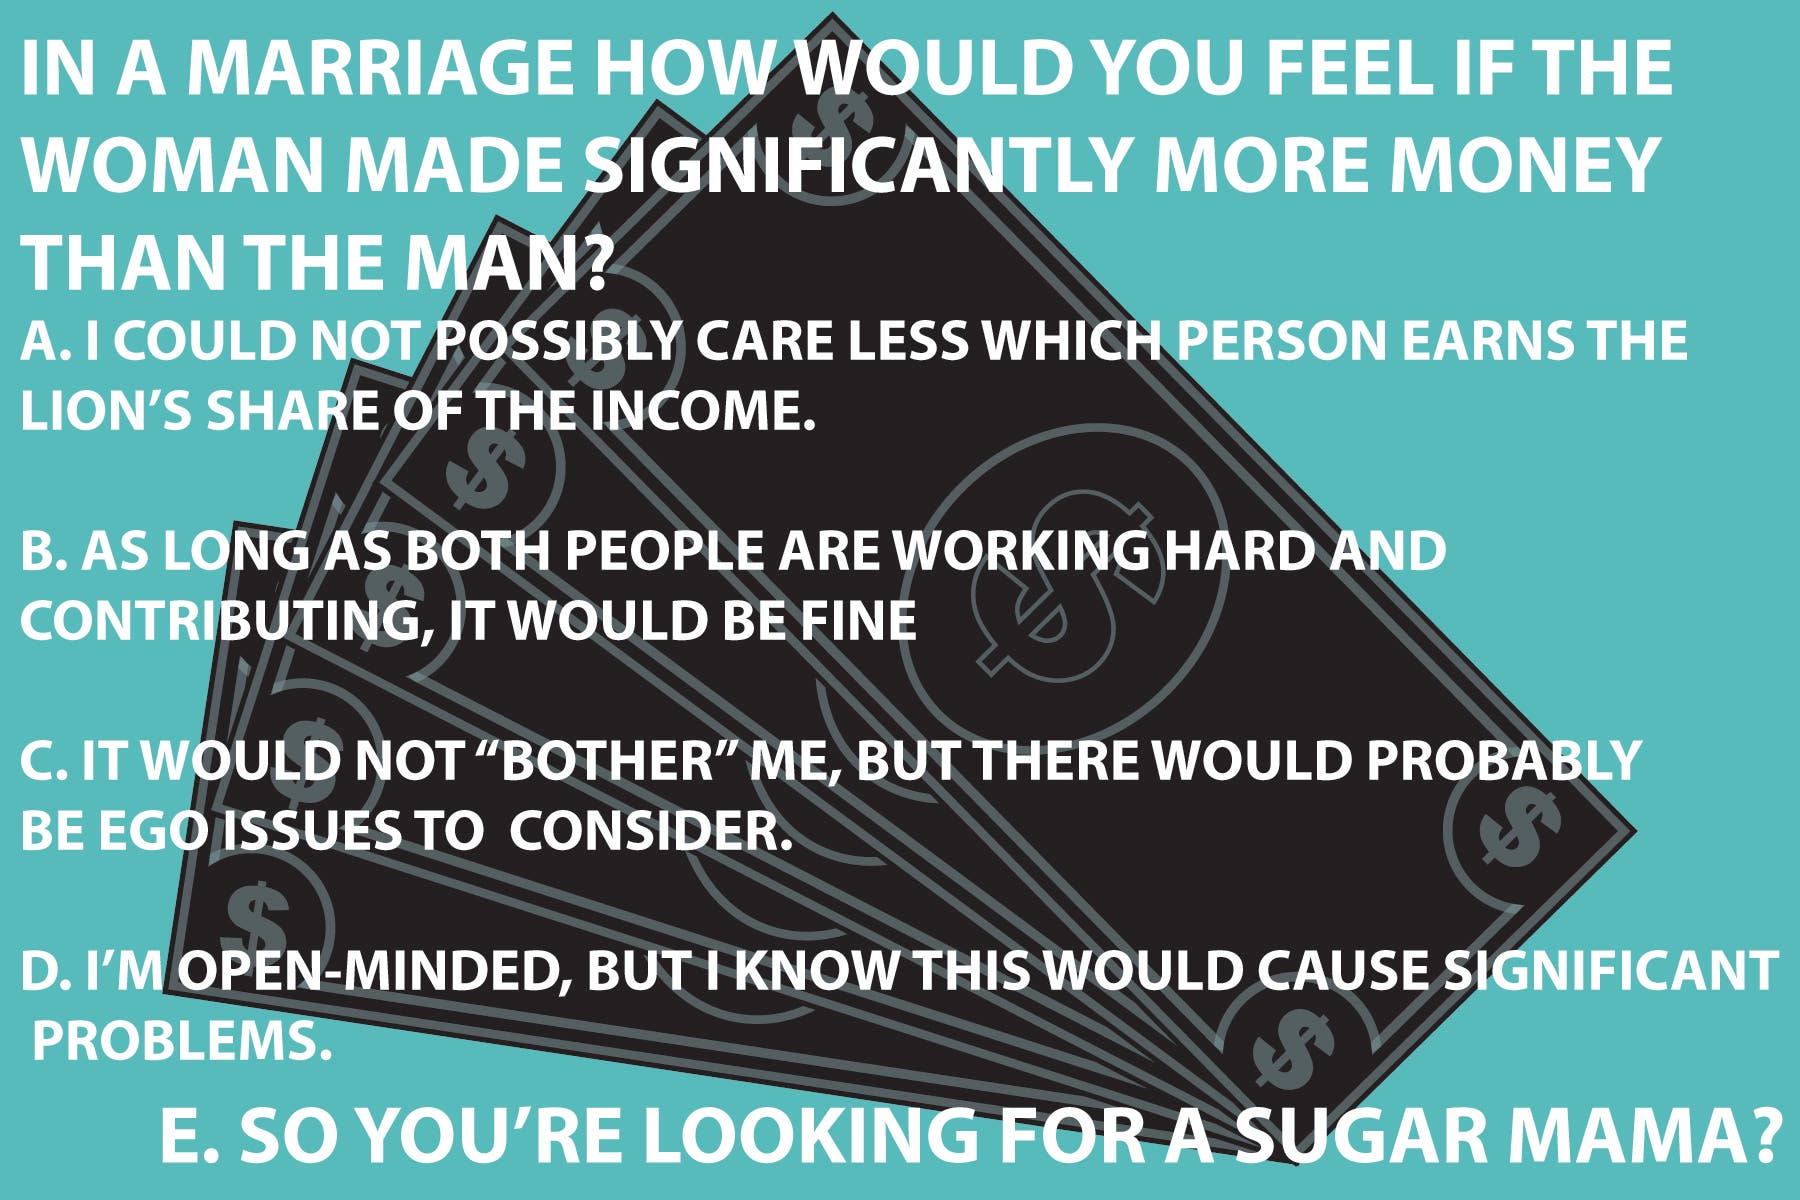  IN A MARRIAGE, HOW WOULD YOU FEEL IF THE WOMAN MADE SIGNIFICANTLY MORE MONEY THAN THE MAN?